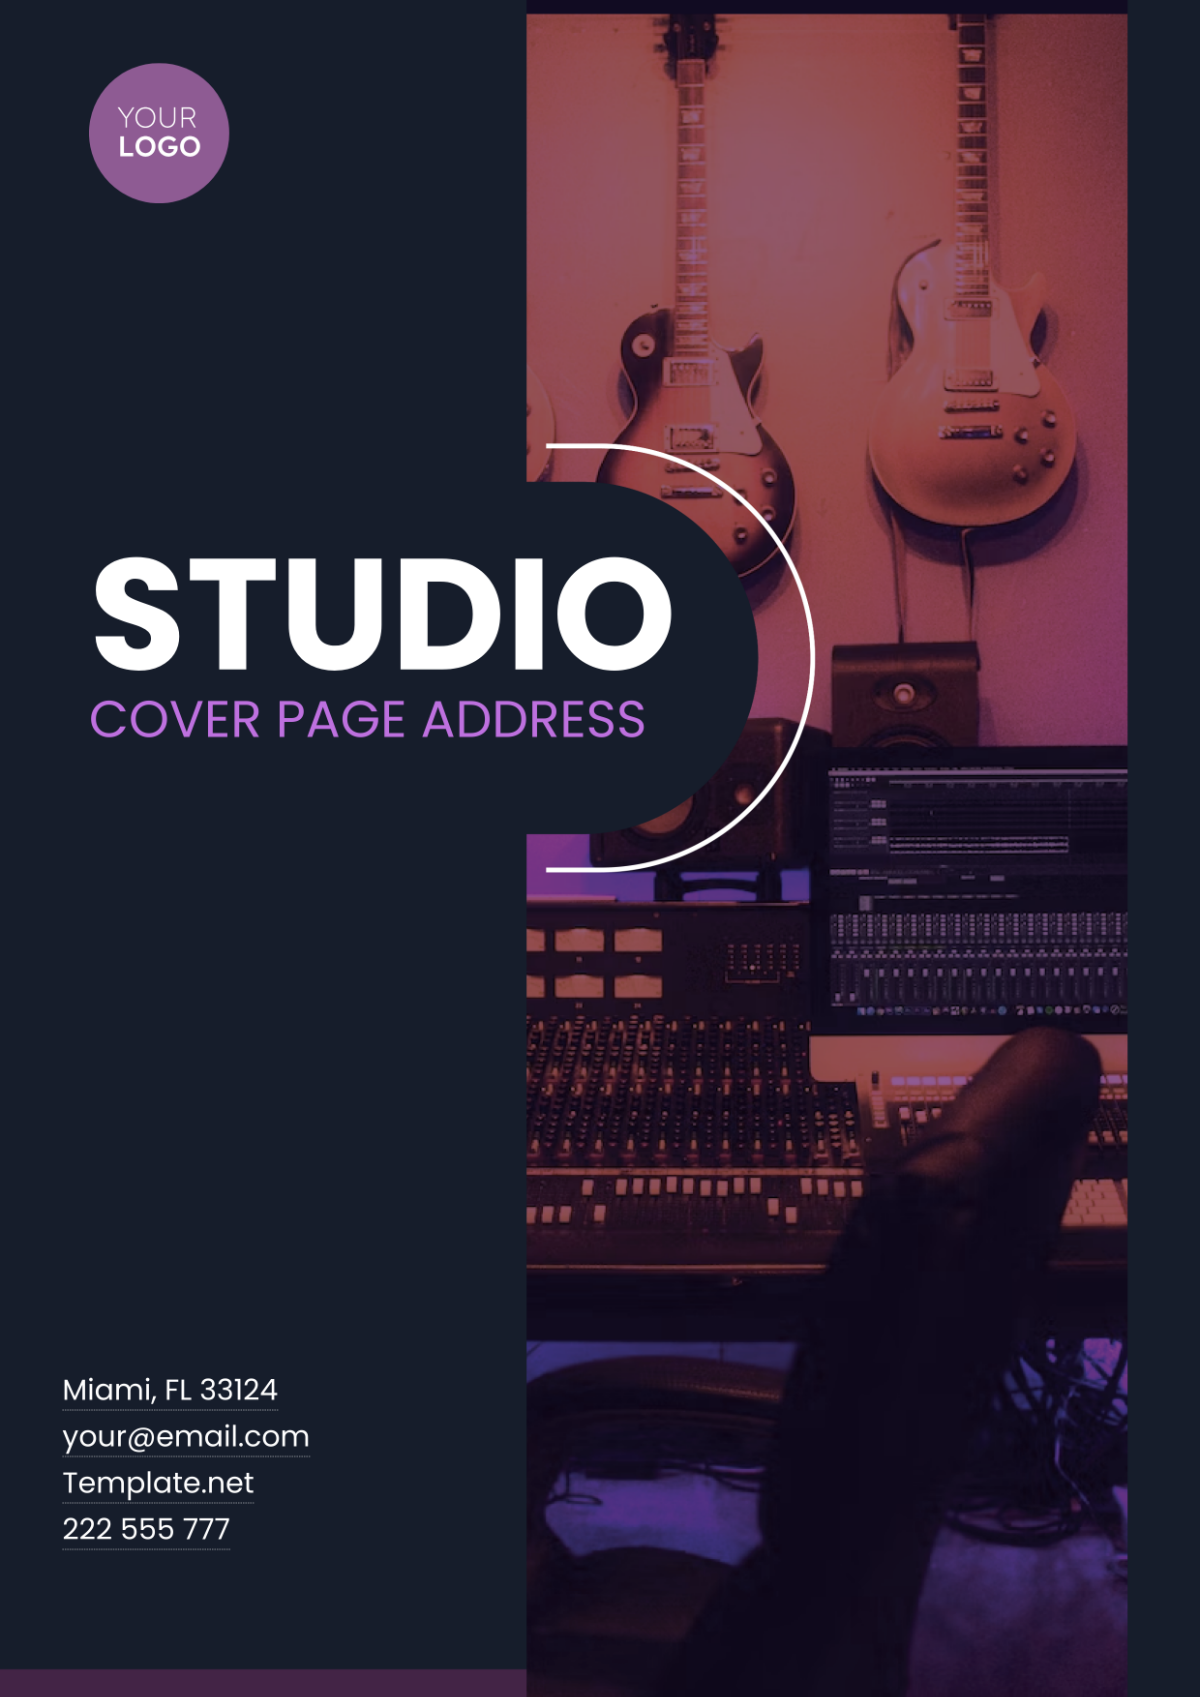 Studio Cover Page Address Template